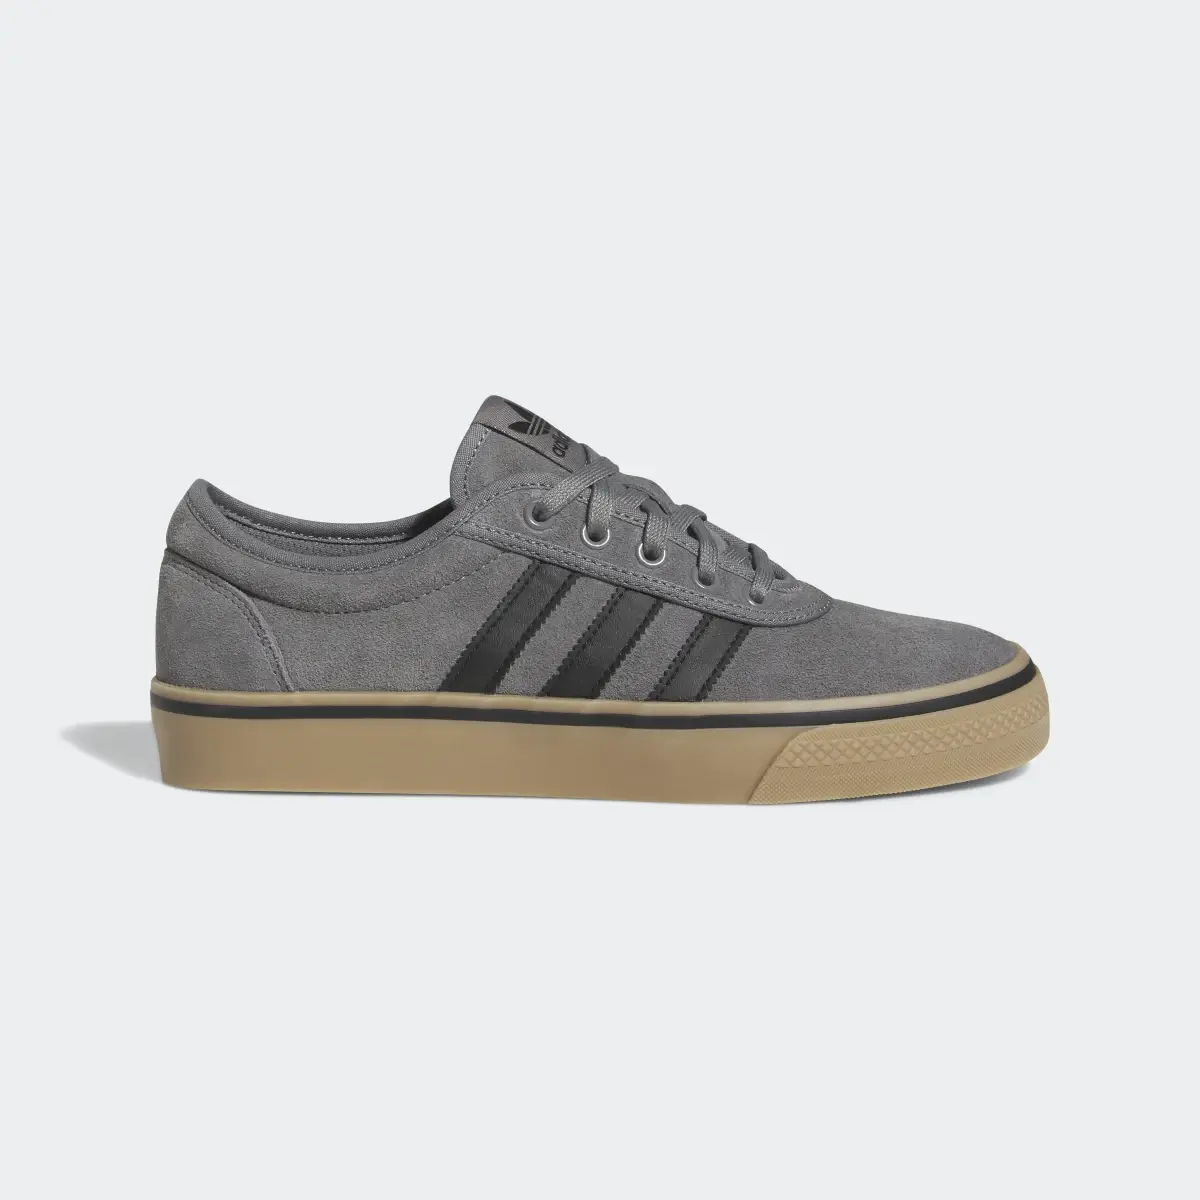 Adidas Adiease Shoes. 2